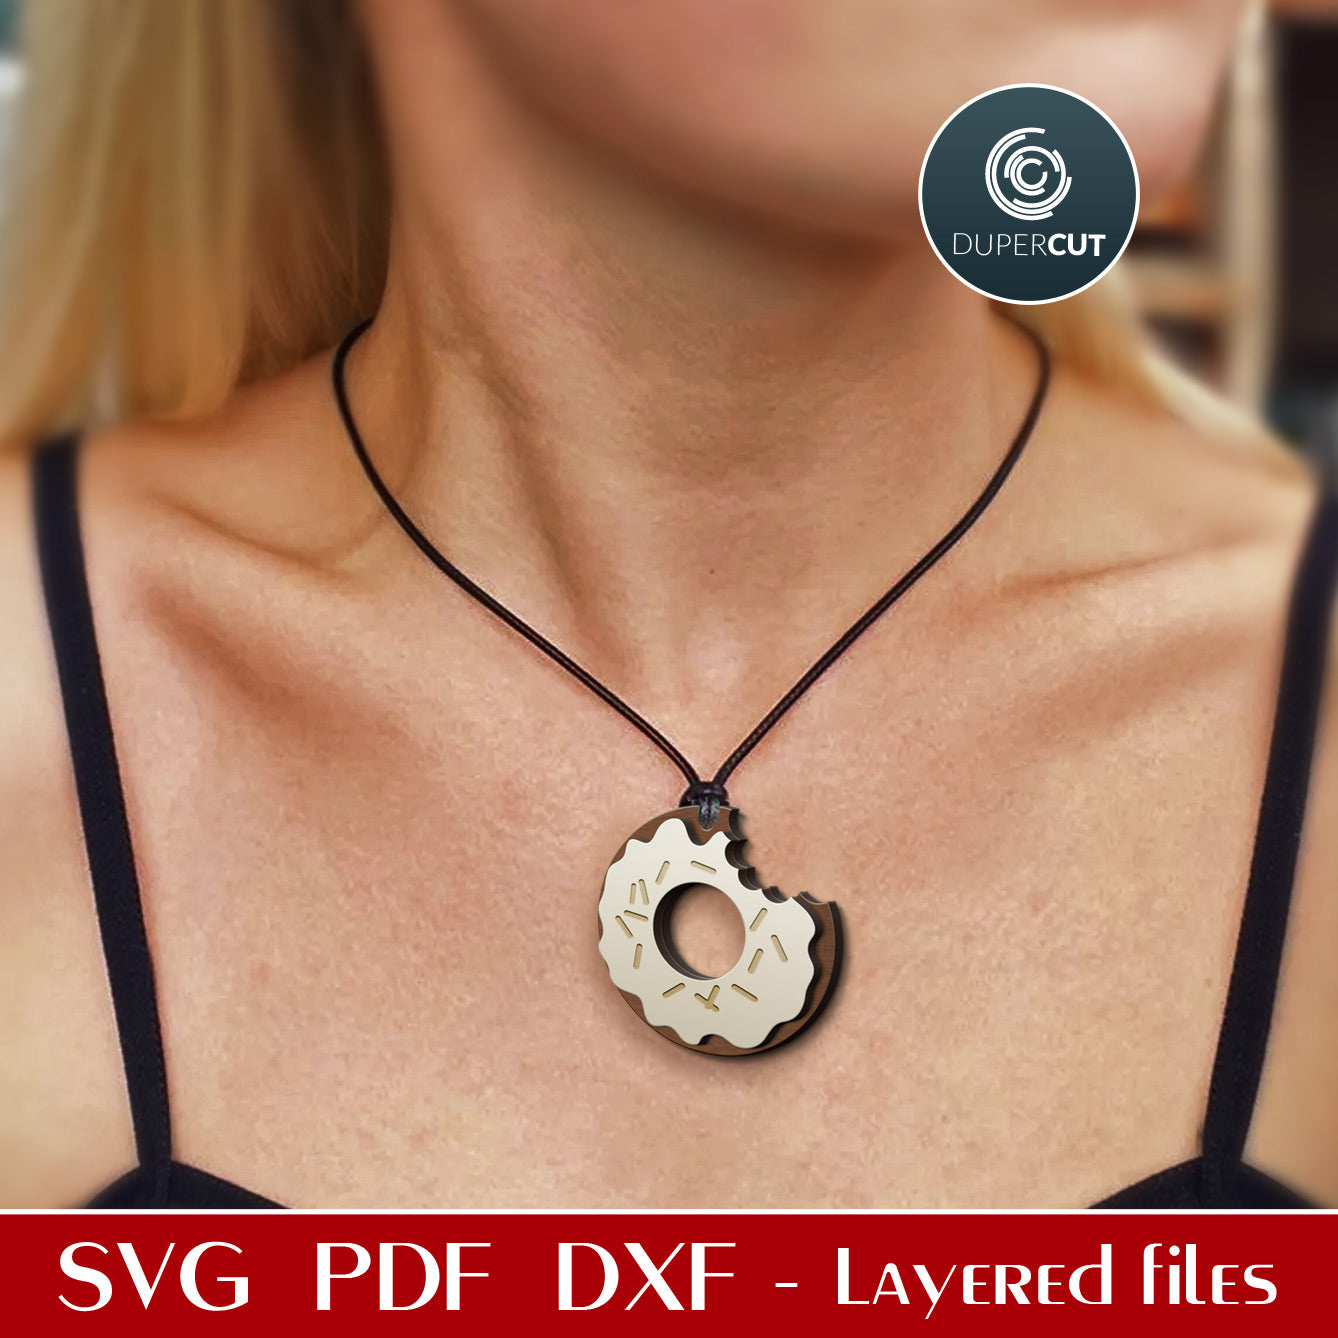 Donut necklace - SVG DXF laser cutting files template pattern for Glowforge, Cricut, Silhouette, CNC plasma machines by www.DuperCut.com